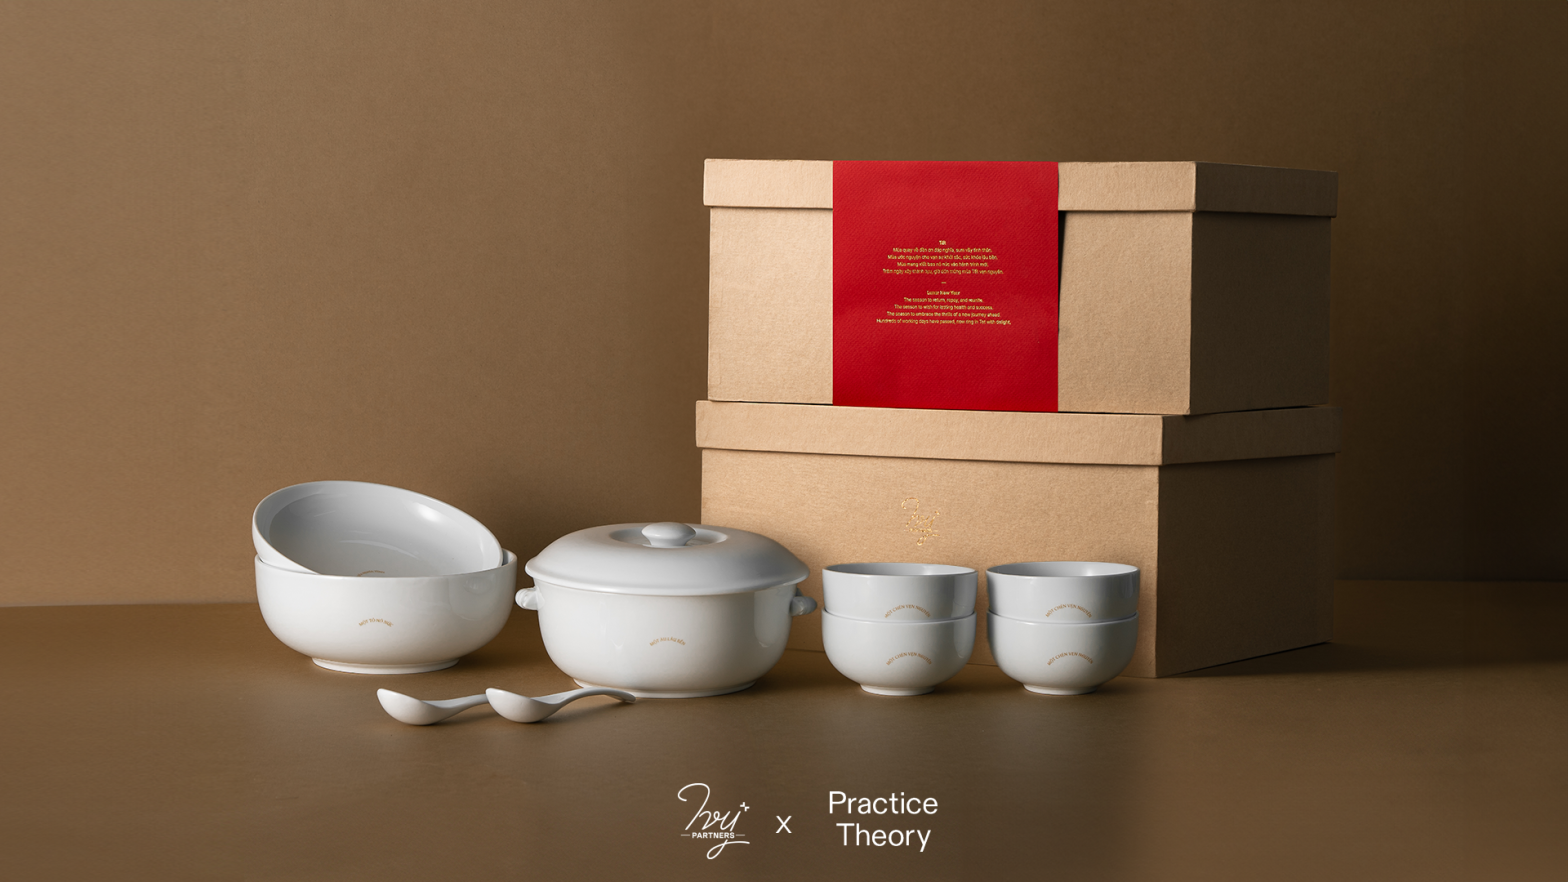 The Gift Set Crafted by Ivy+Partners and Practice Theory Keeps Tet “Full” in Everyday Life